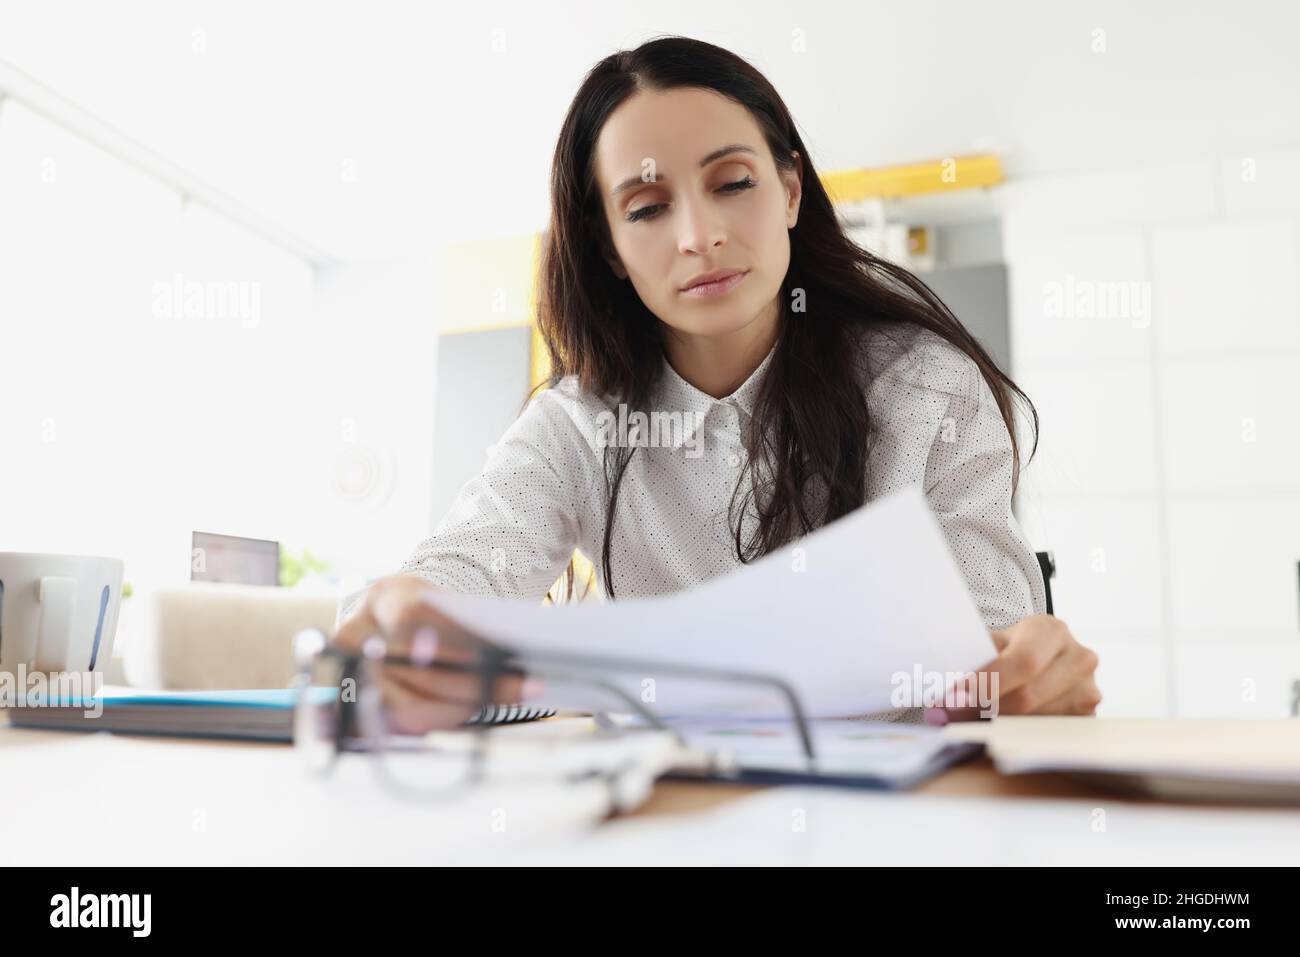 Tired overworked young woman go through paper on working place Stock Photo